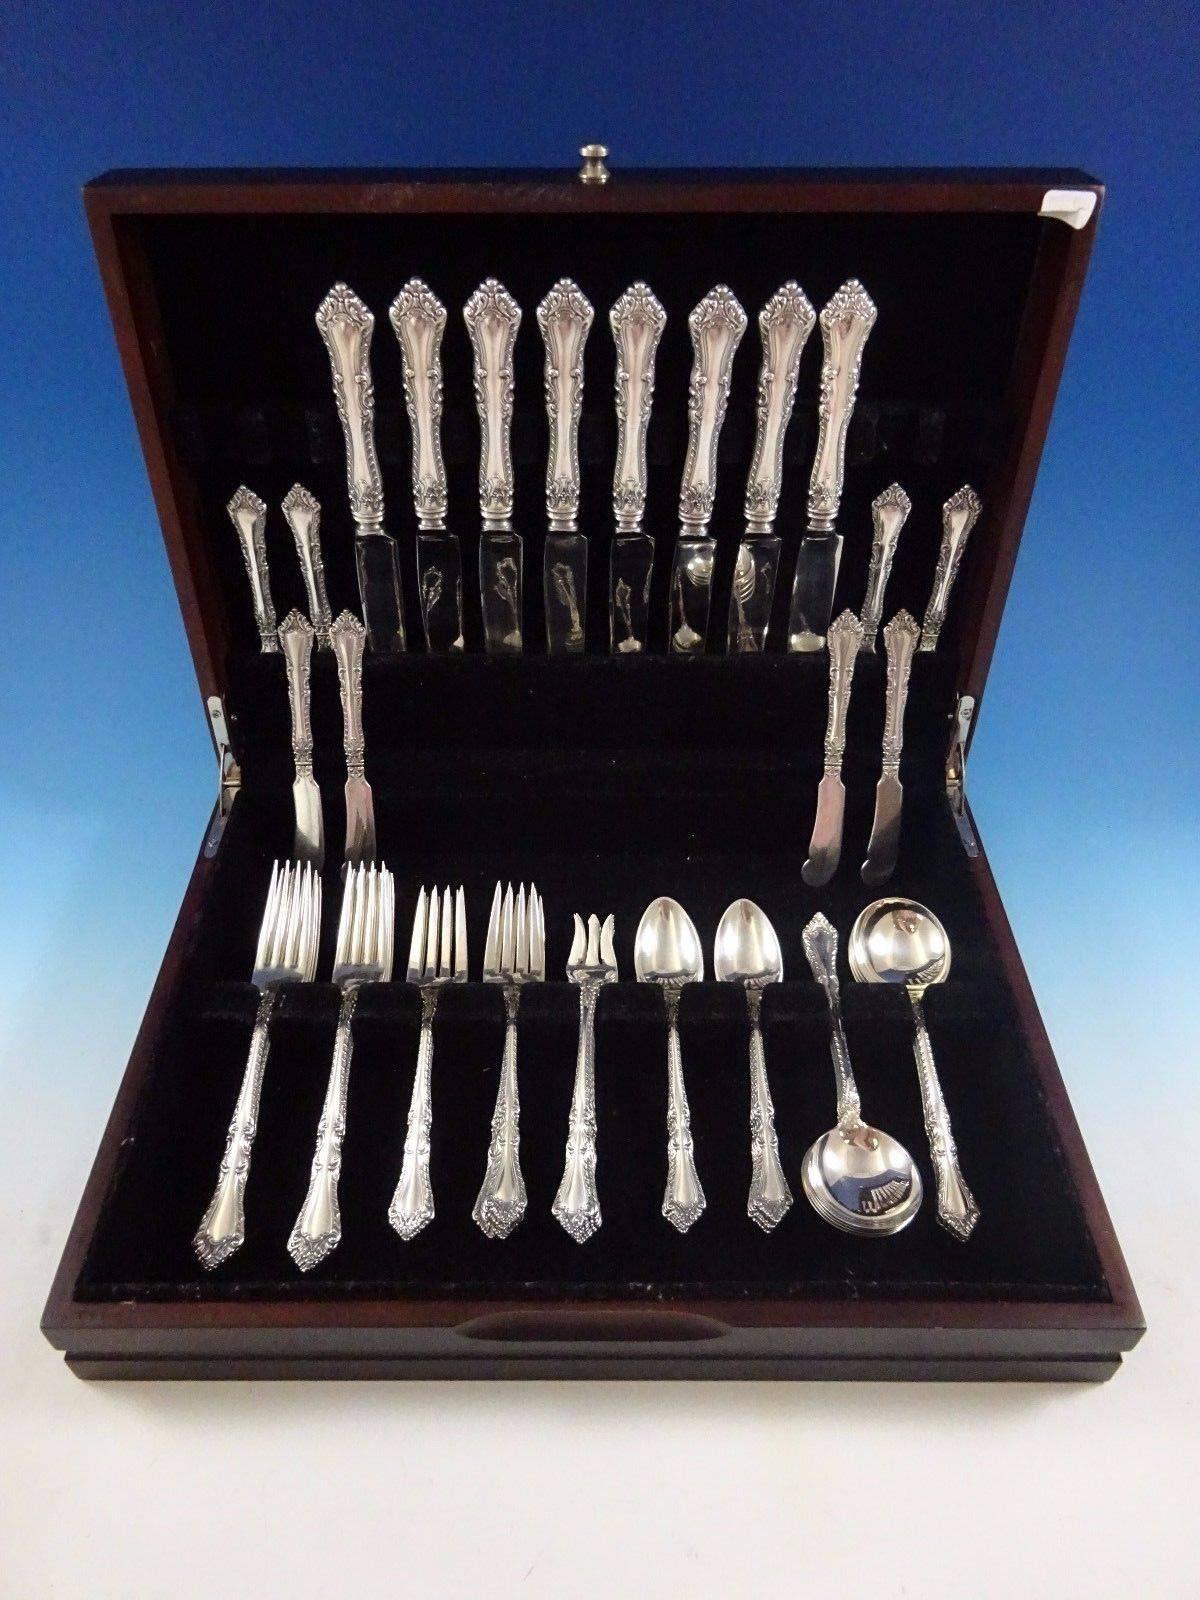 Foxhall by Watson sterling silver flatware set - 56 pieces. This set includes: 

Eight knives, 9